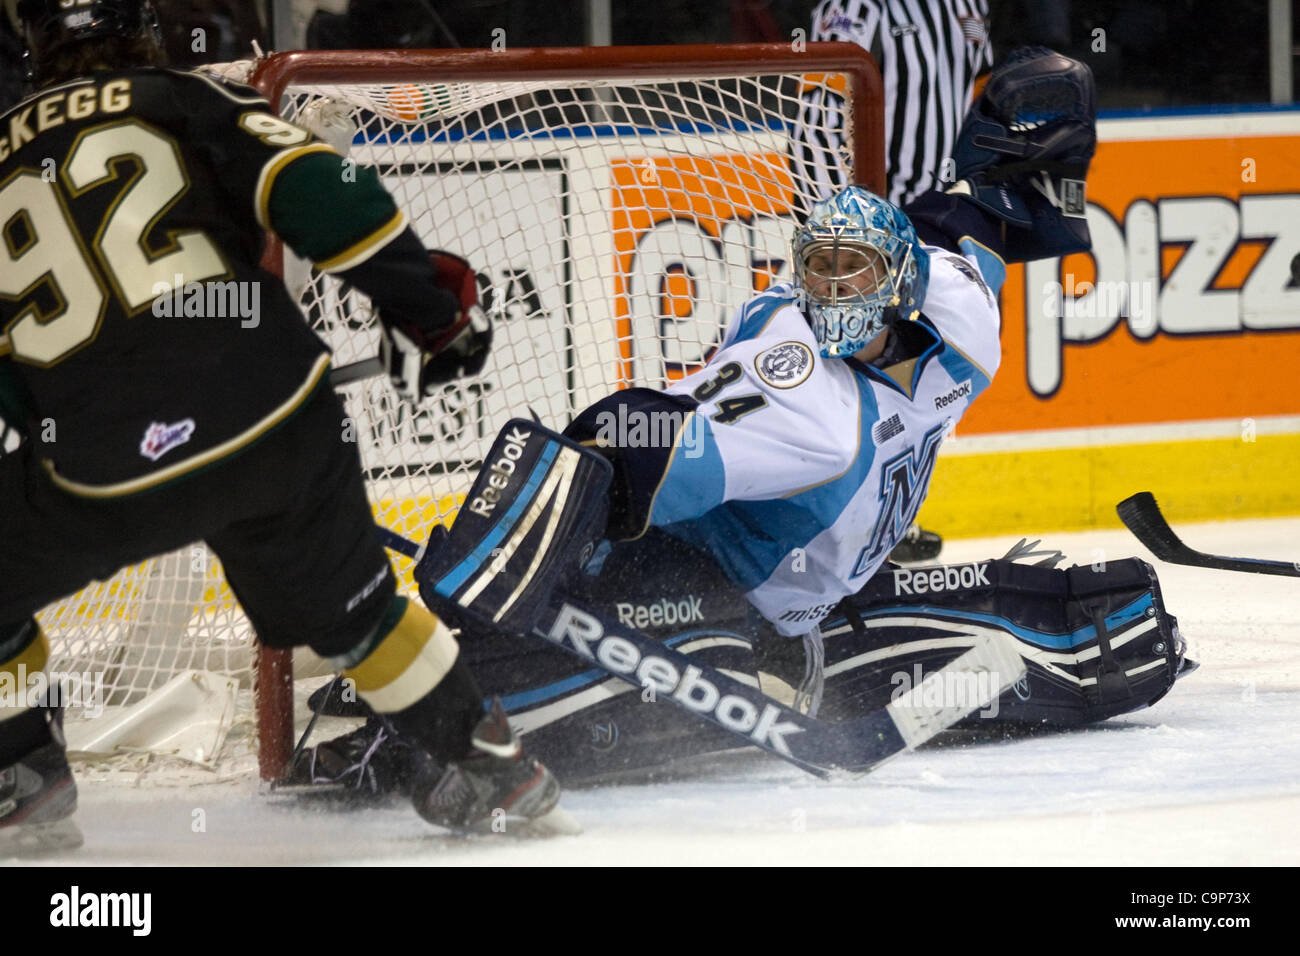 London Ontario, Canada - February 4, 2012. Majors goalie Brandon Maxwell makes a save on Brett McKegg of the Knights in a Ontario Hockey League game between the London Knights and the Mississauga St. Michaels Majors. London won the game 5-2. Stock Photo